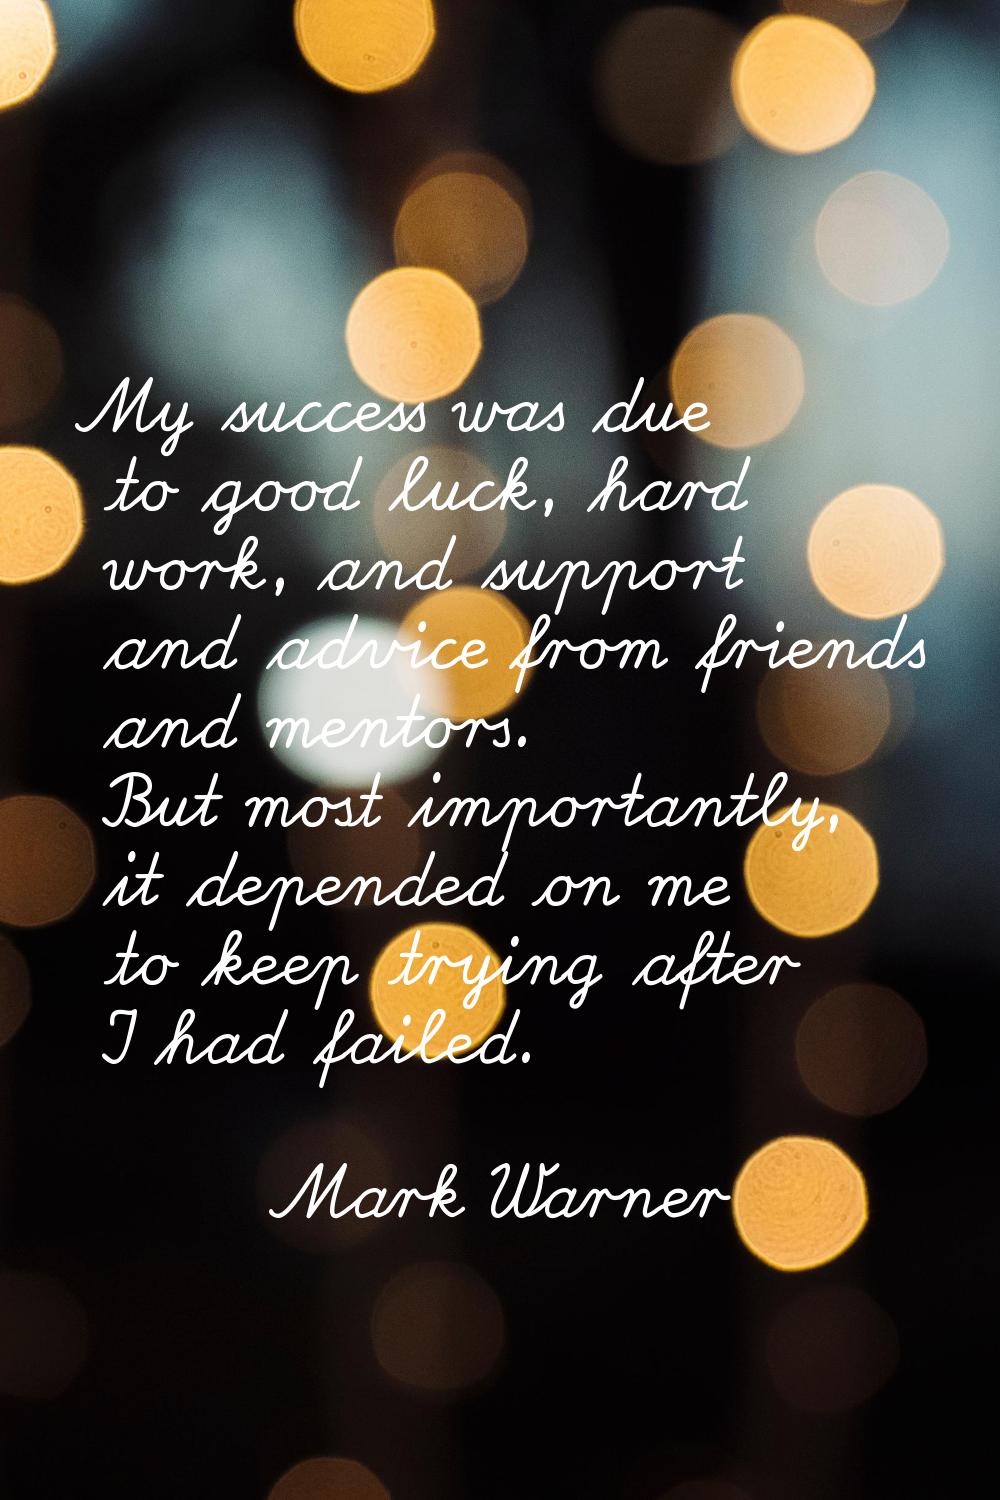 My success was due to good luck, hard work, and support and advice from friends and mentors. But mo